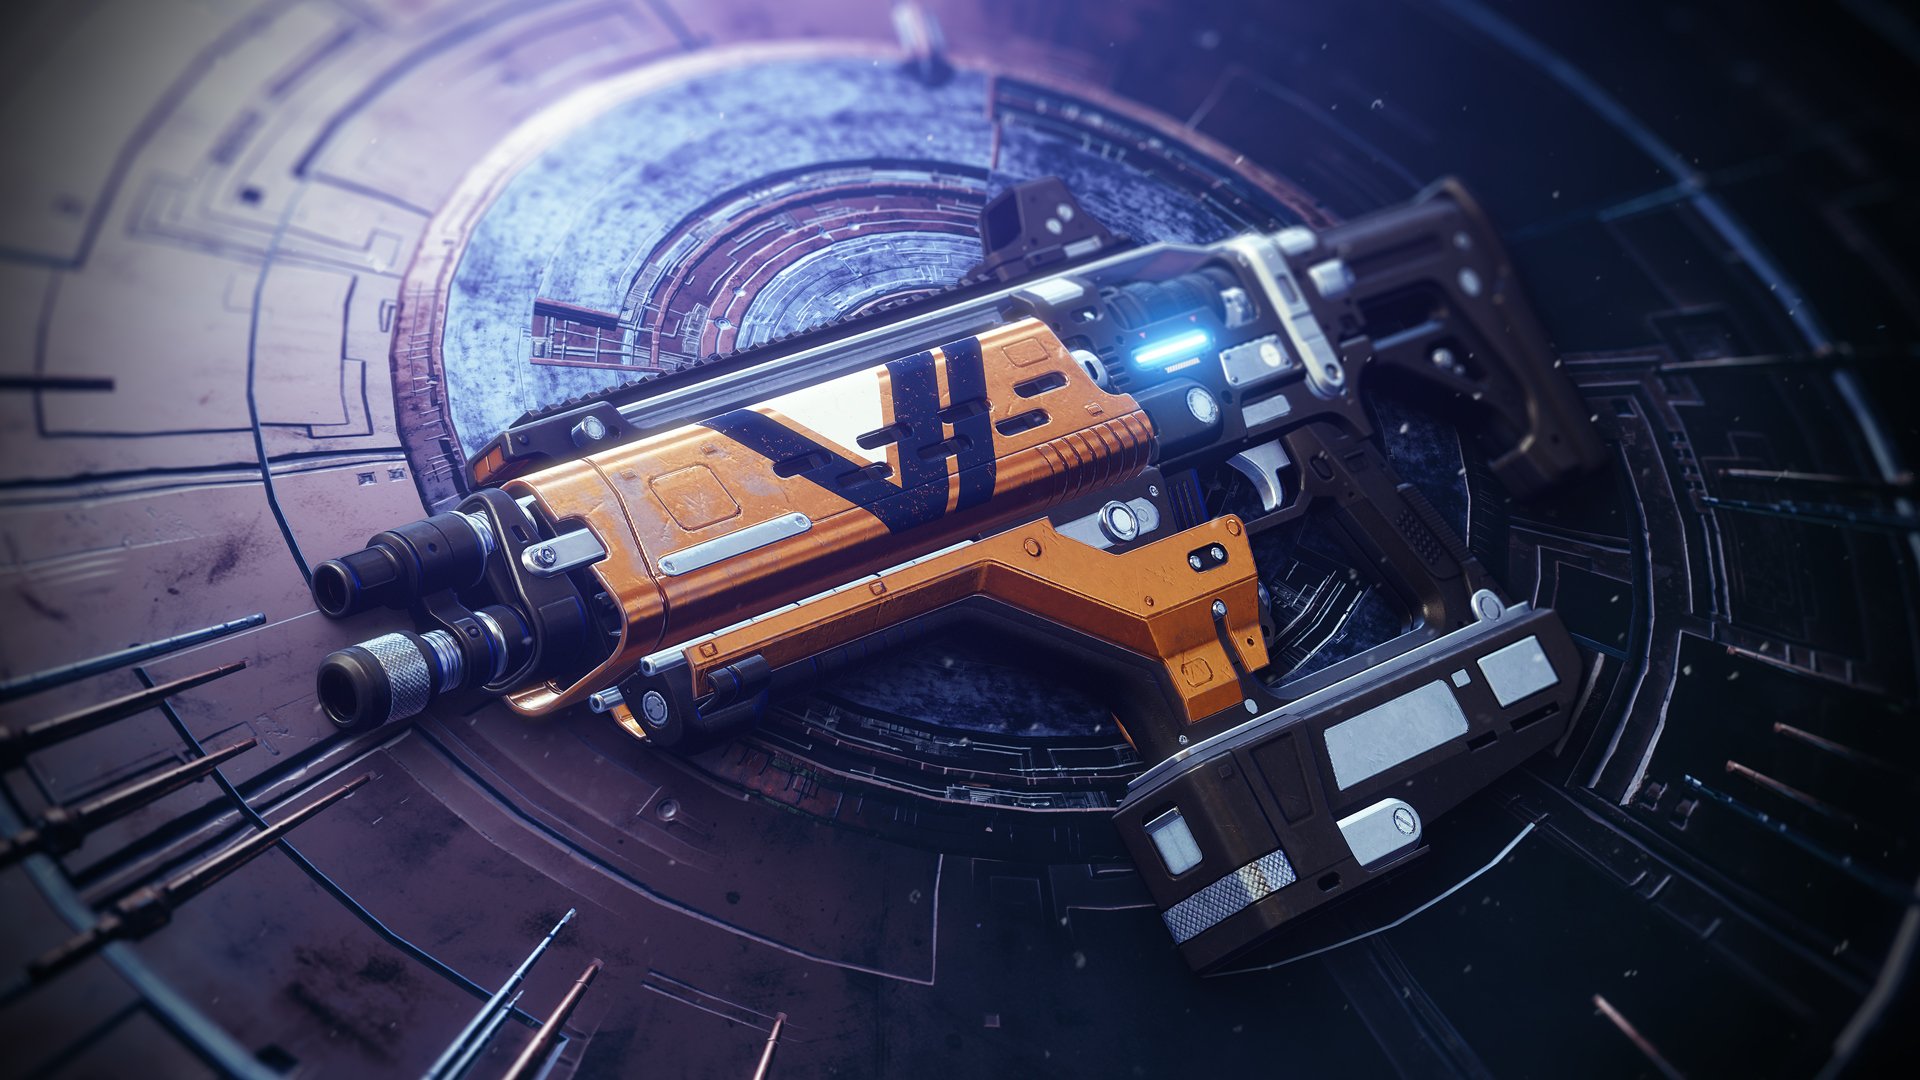 You won’t need to pick up primary ammo in Destiny 2 any more